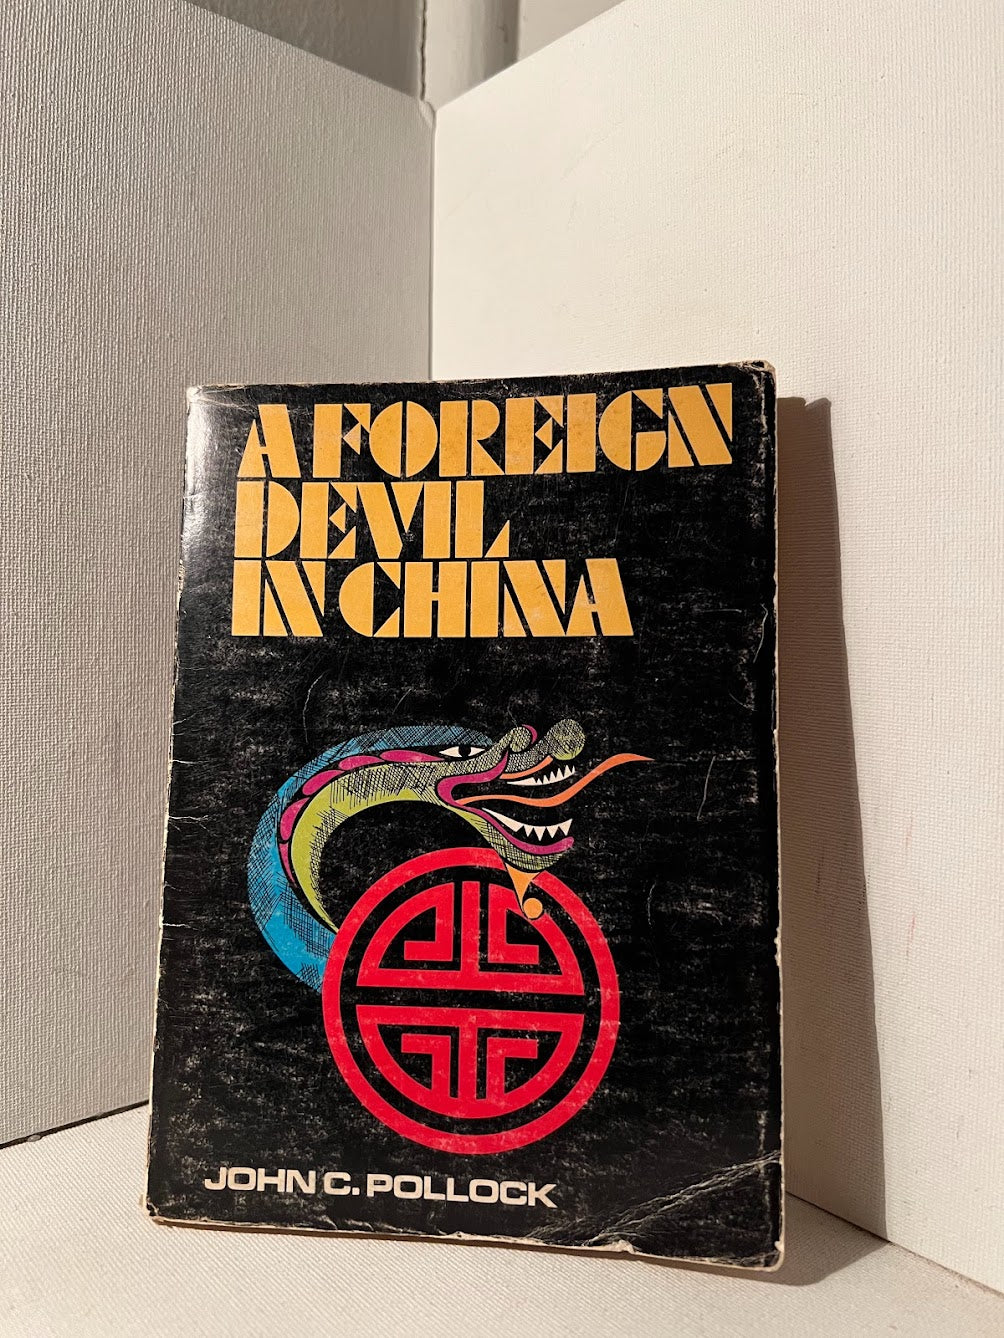 A Foreign Devil in China by John C. Pollock